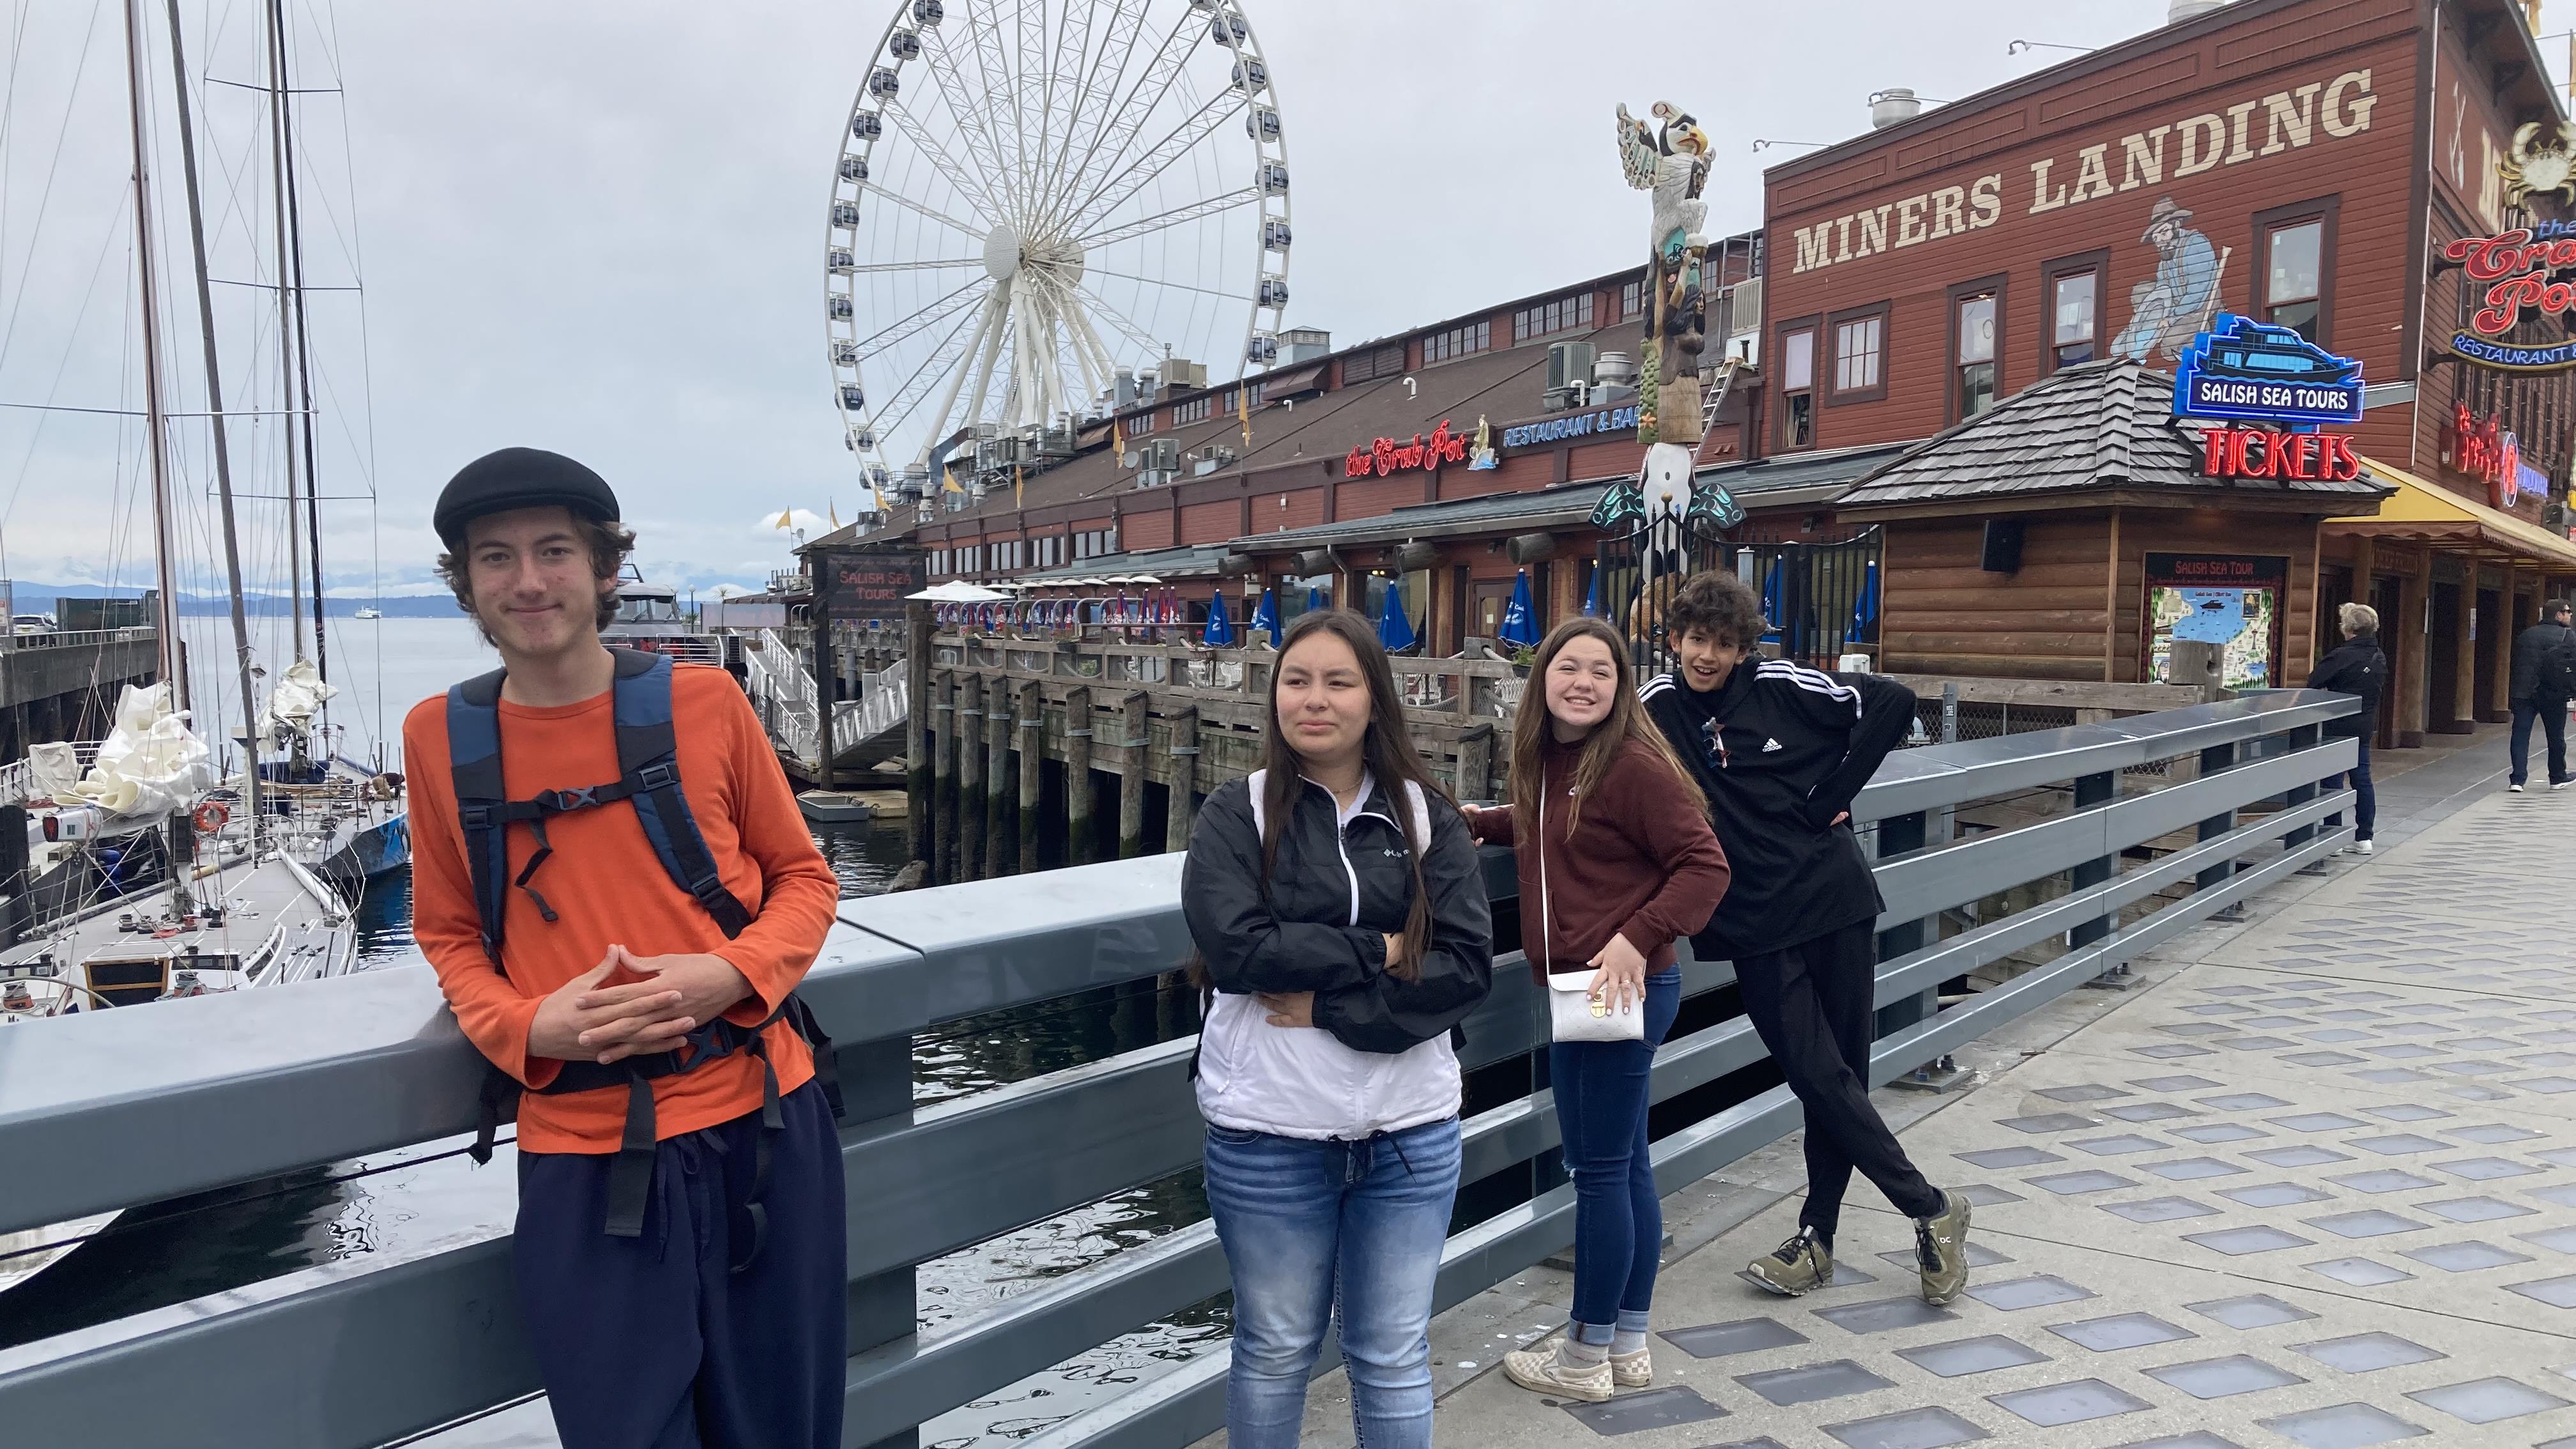 Eight graders on their trip